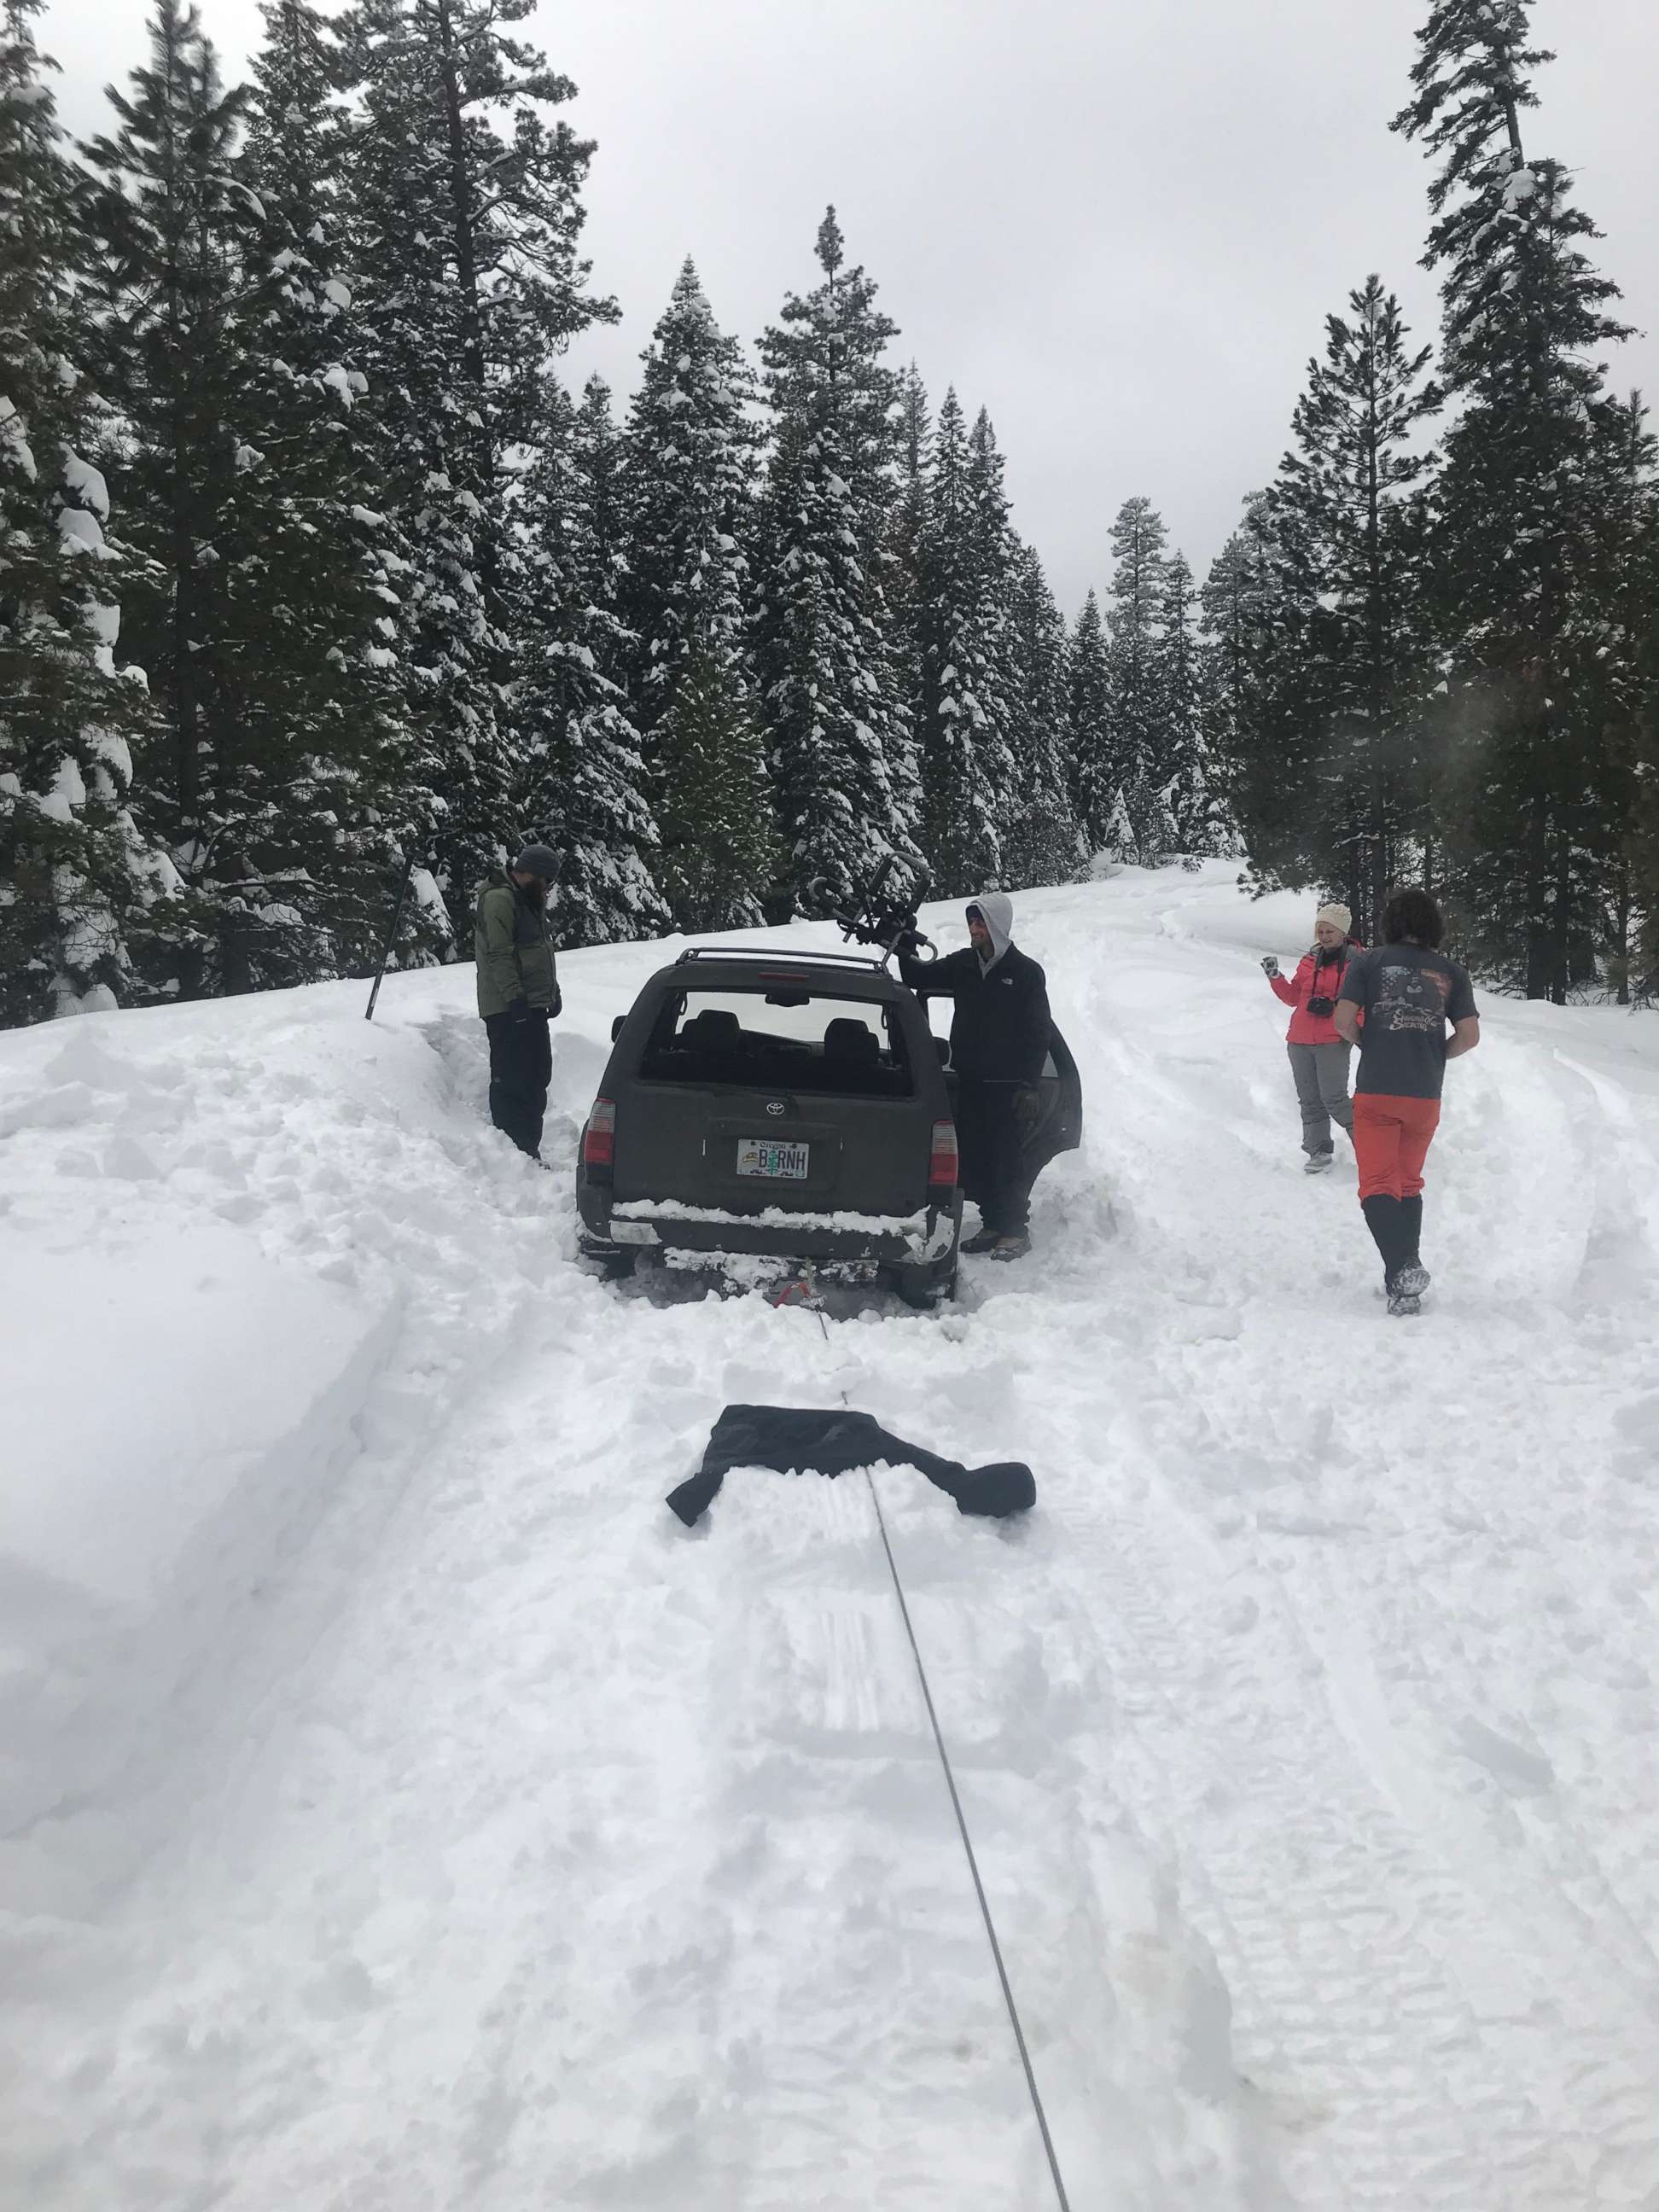 PHOTO: Jeremy R. Taylor's truck is pulled out of deep snow near Sunriver, Ore., on March 1, 2019, after he was stuck with his dog for five days.